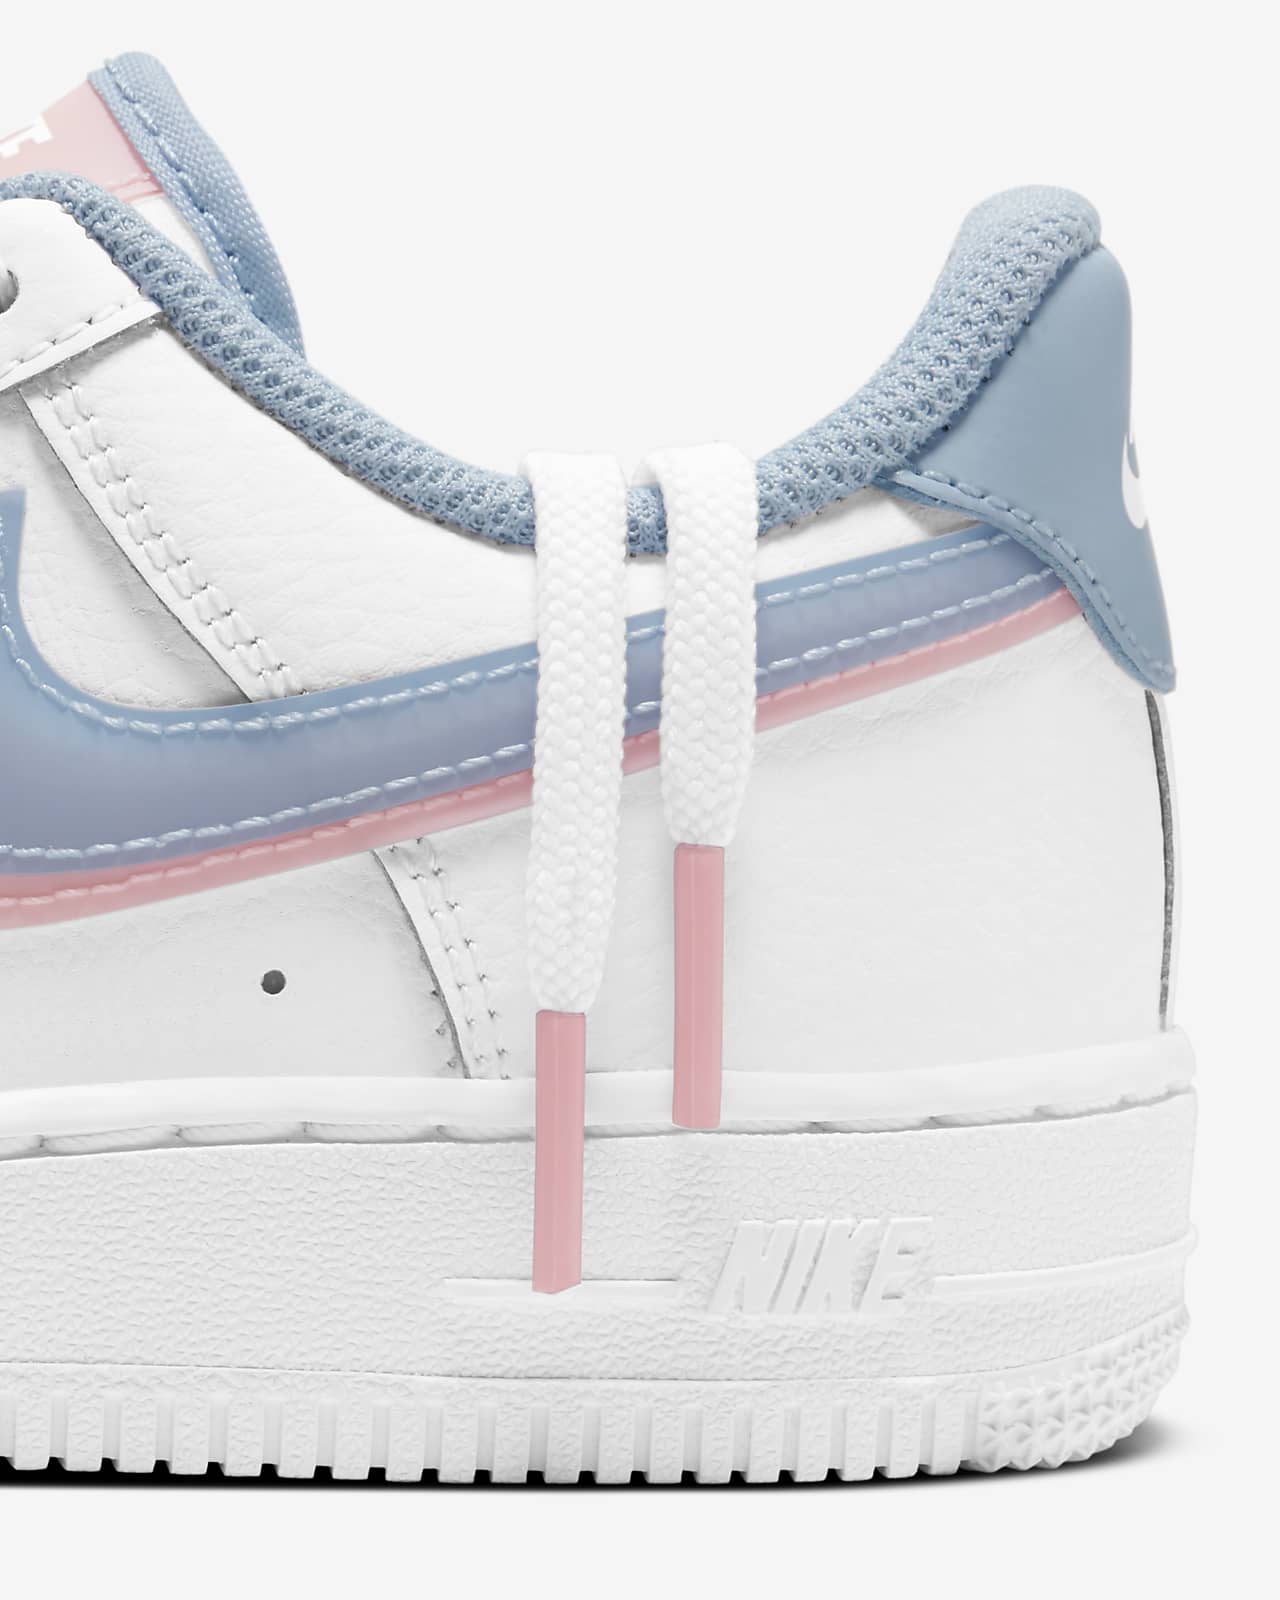 white & blue air force 1 lv8 3 trainers youth